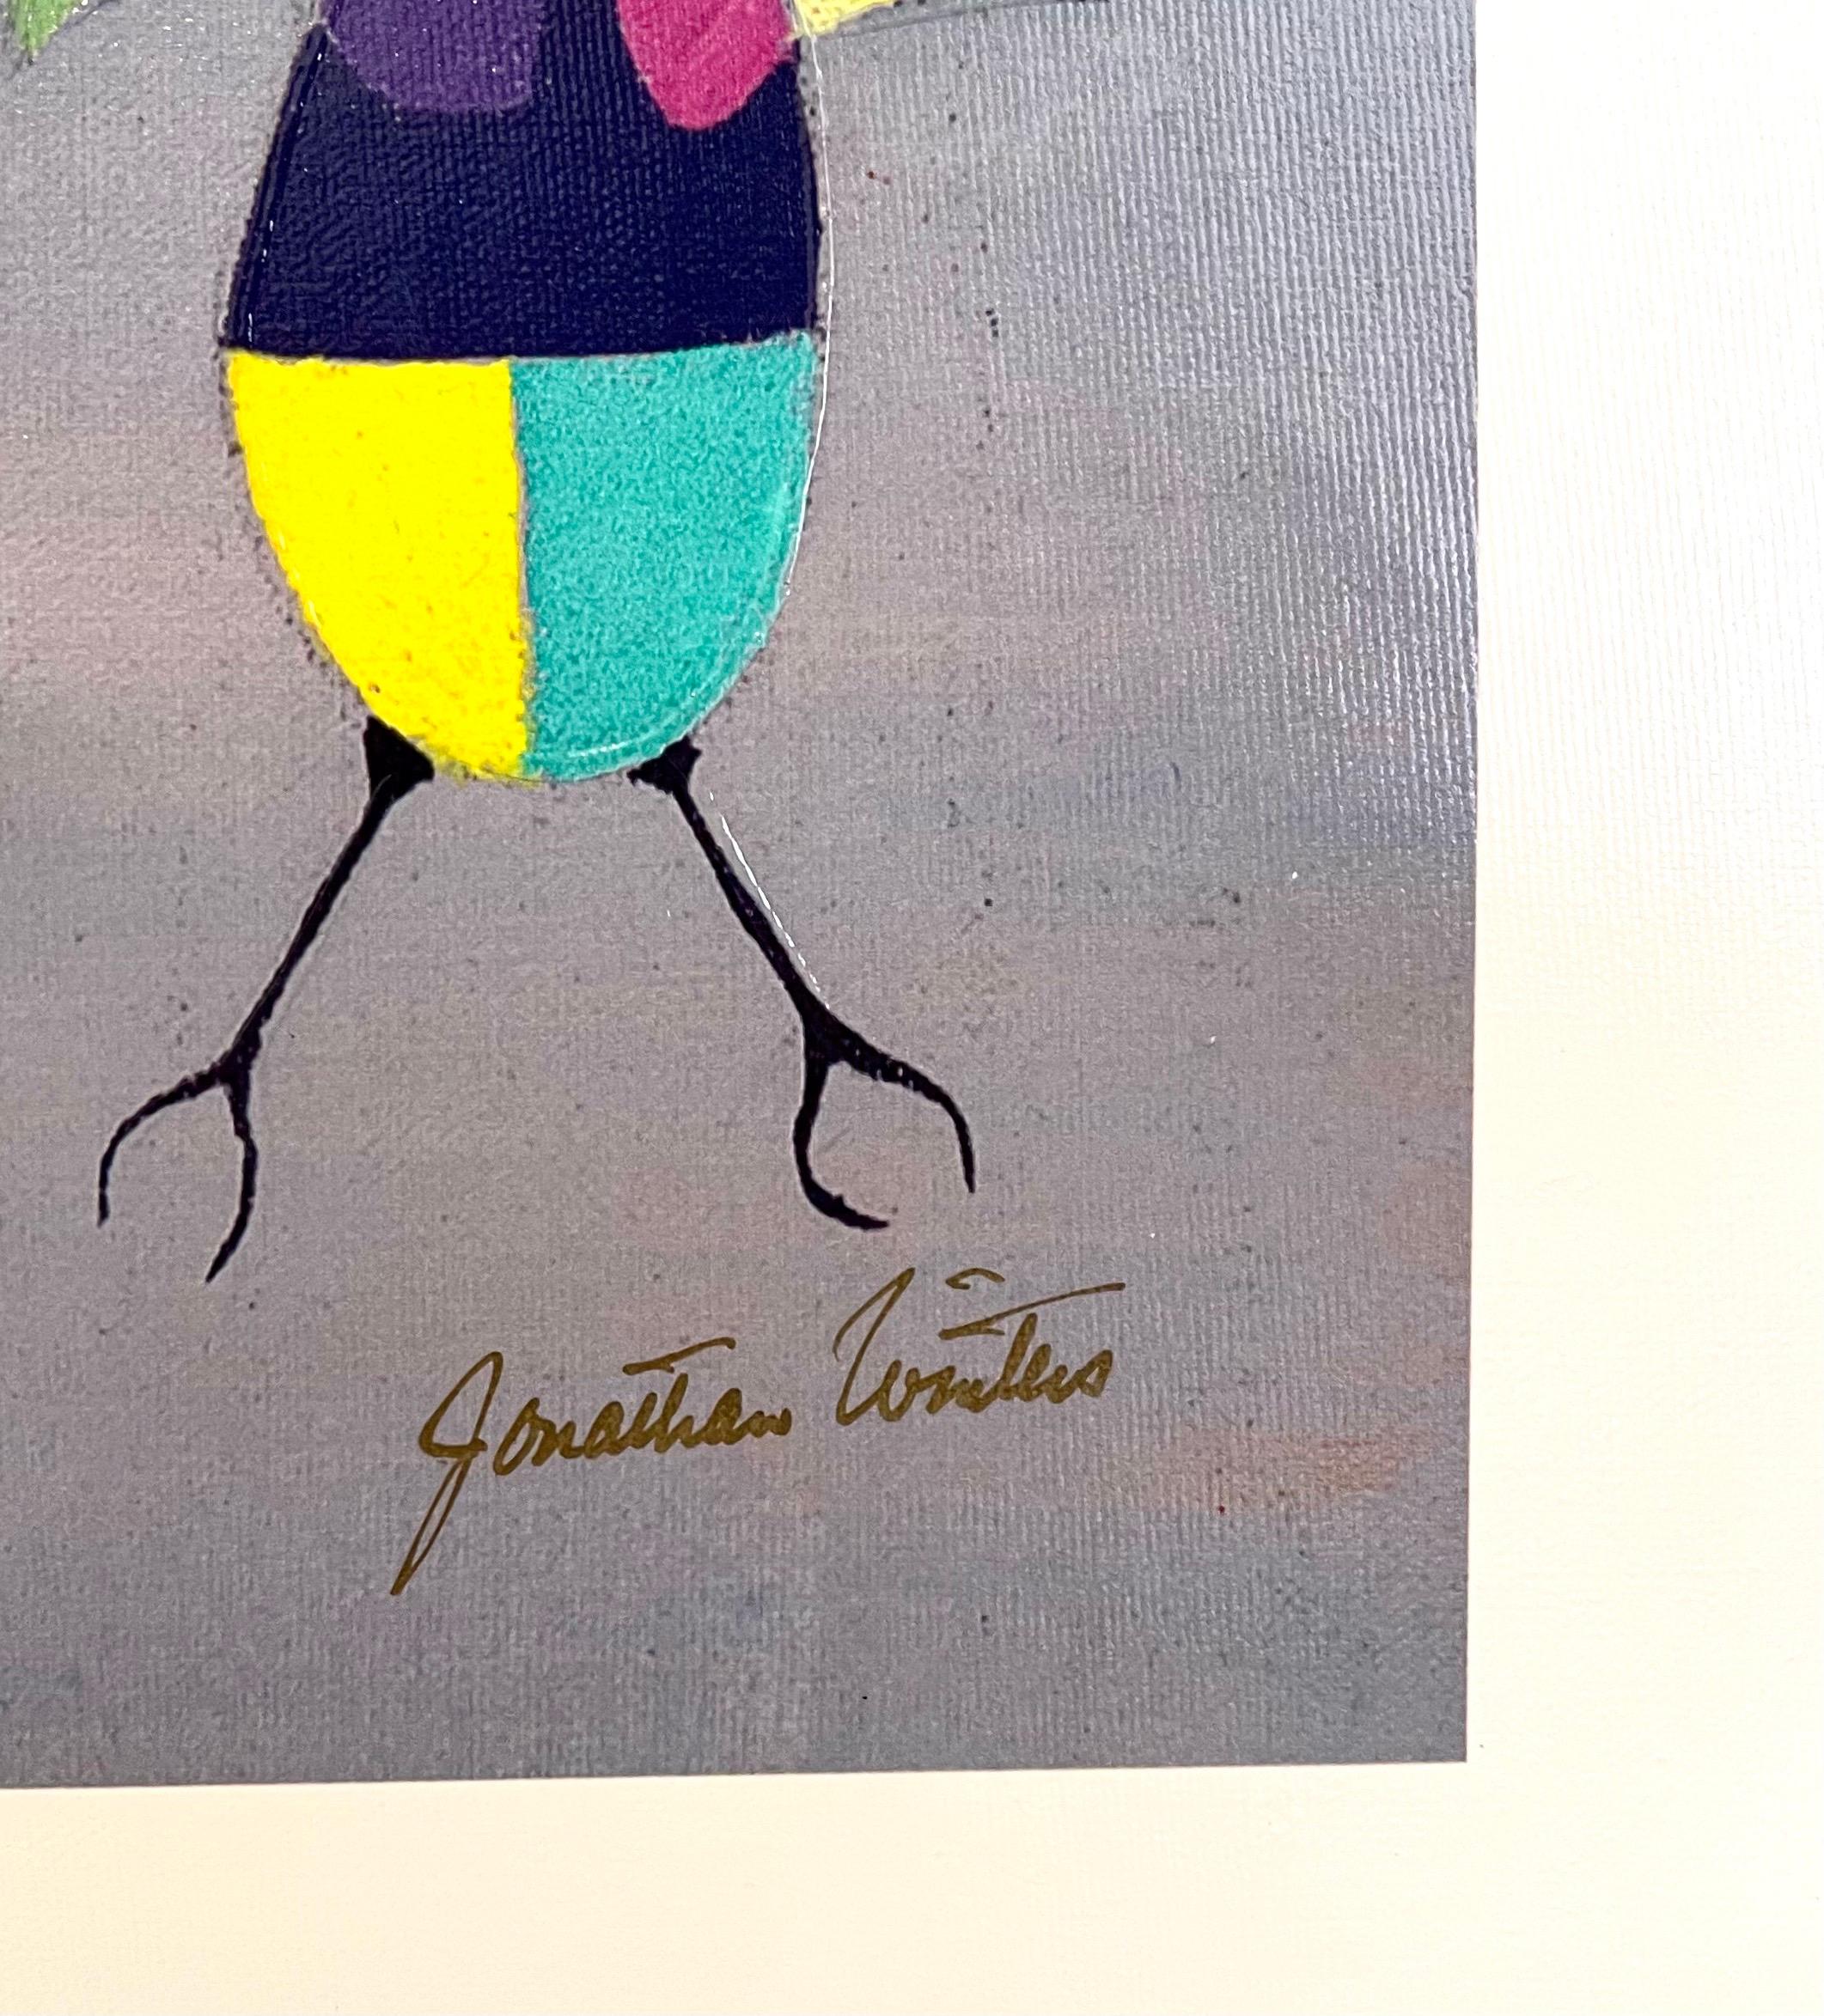 Overall 21 X 27 image is 17.25 X 23.5

This is a mixed media print on canvas by beloved comedian and artist Jonathan Winters. 
This one depicts a surrealist bird with umbrellas
Artist: Jonathan Winters 
Medium: Mixed media print on canvas; hand